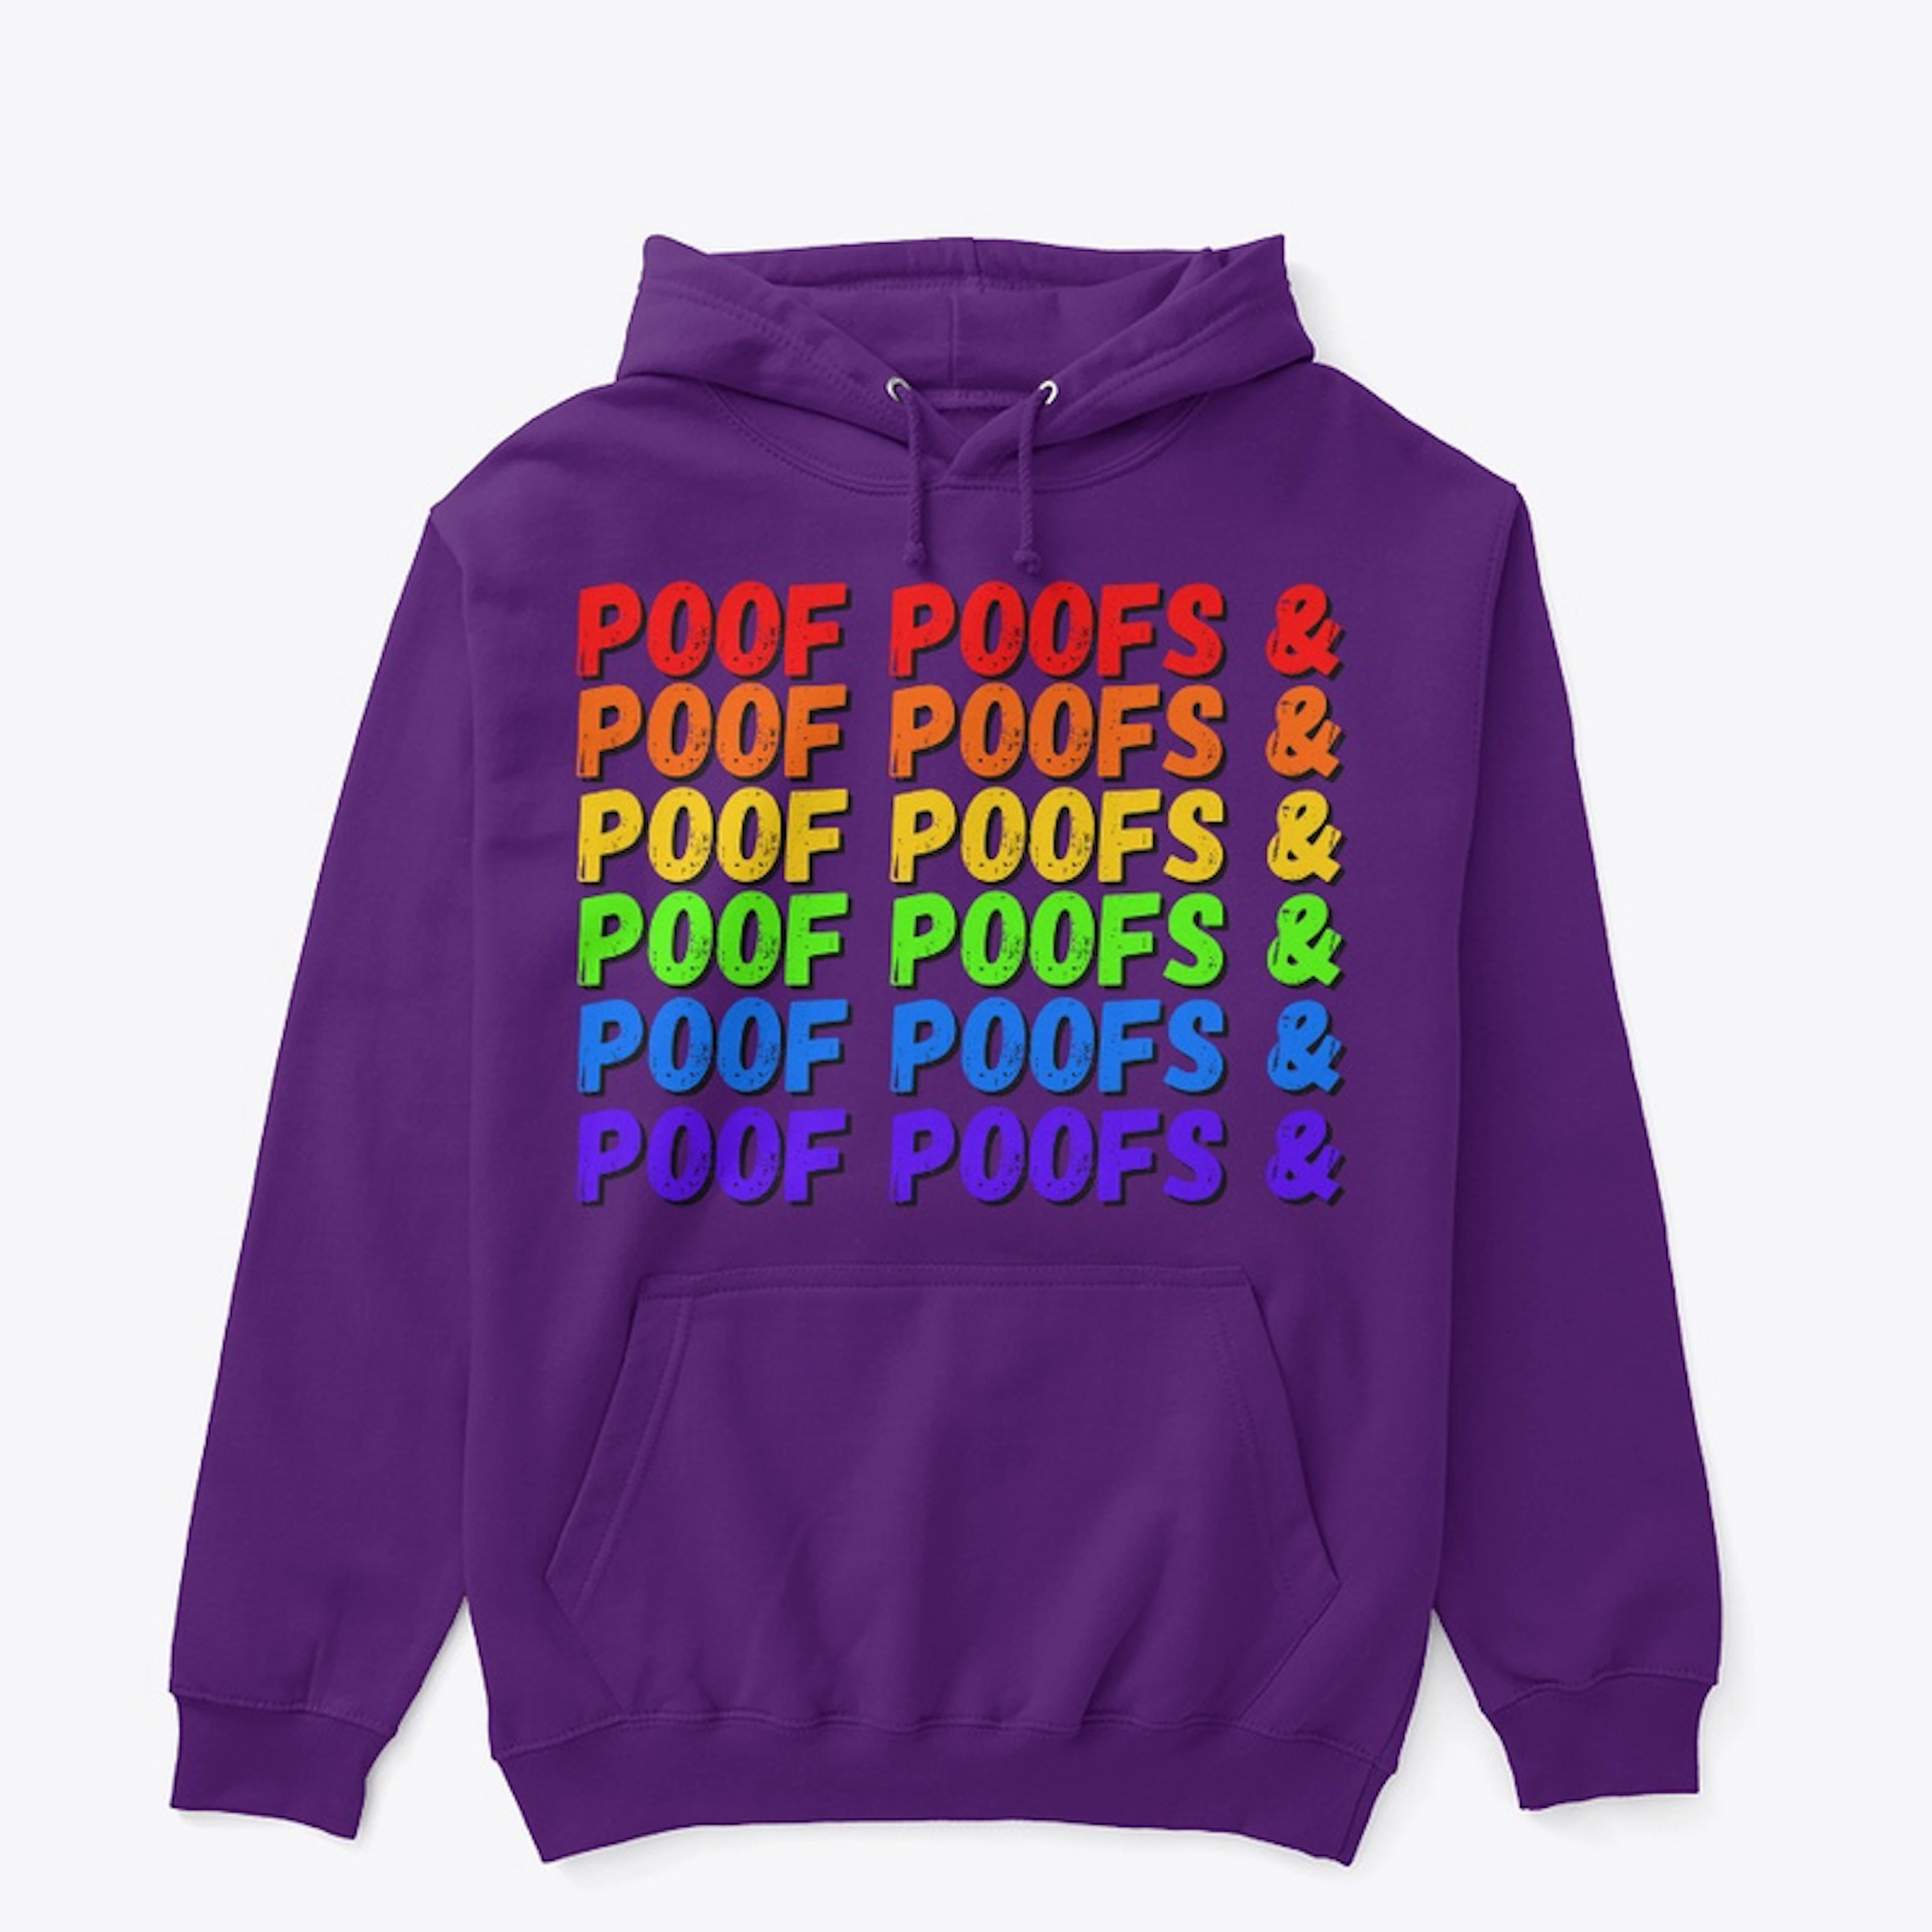 All Da Poof Poofs!